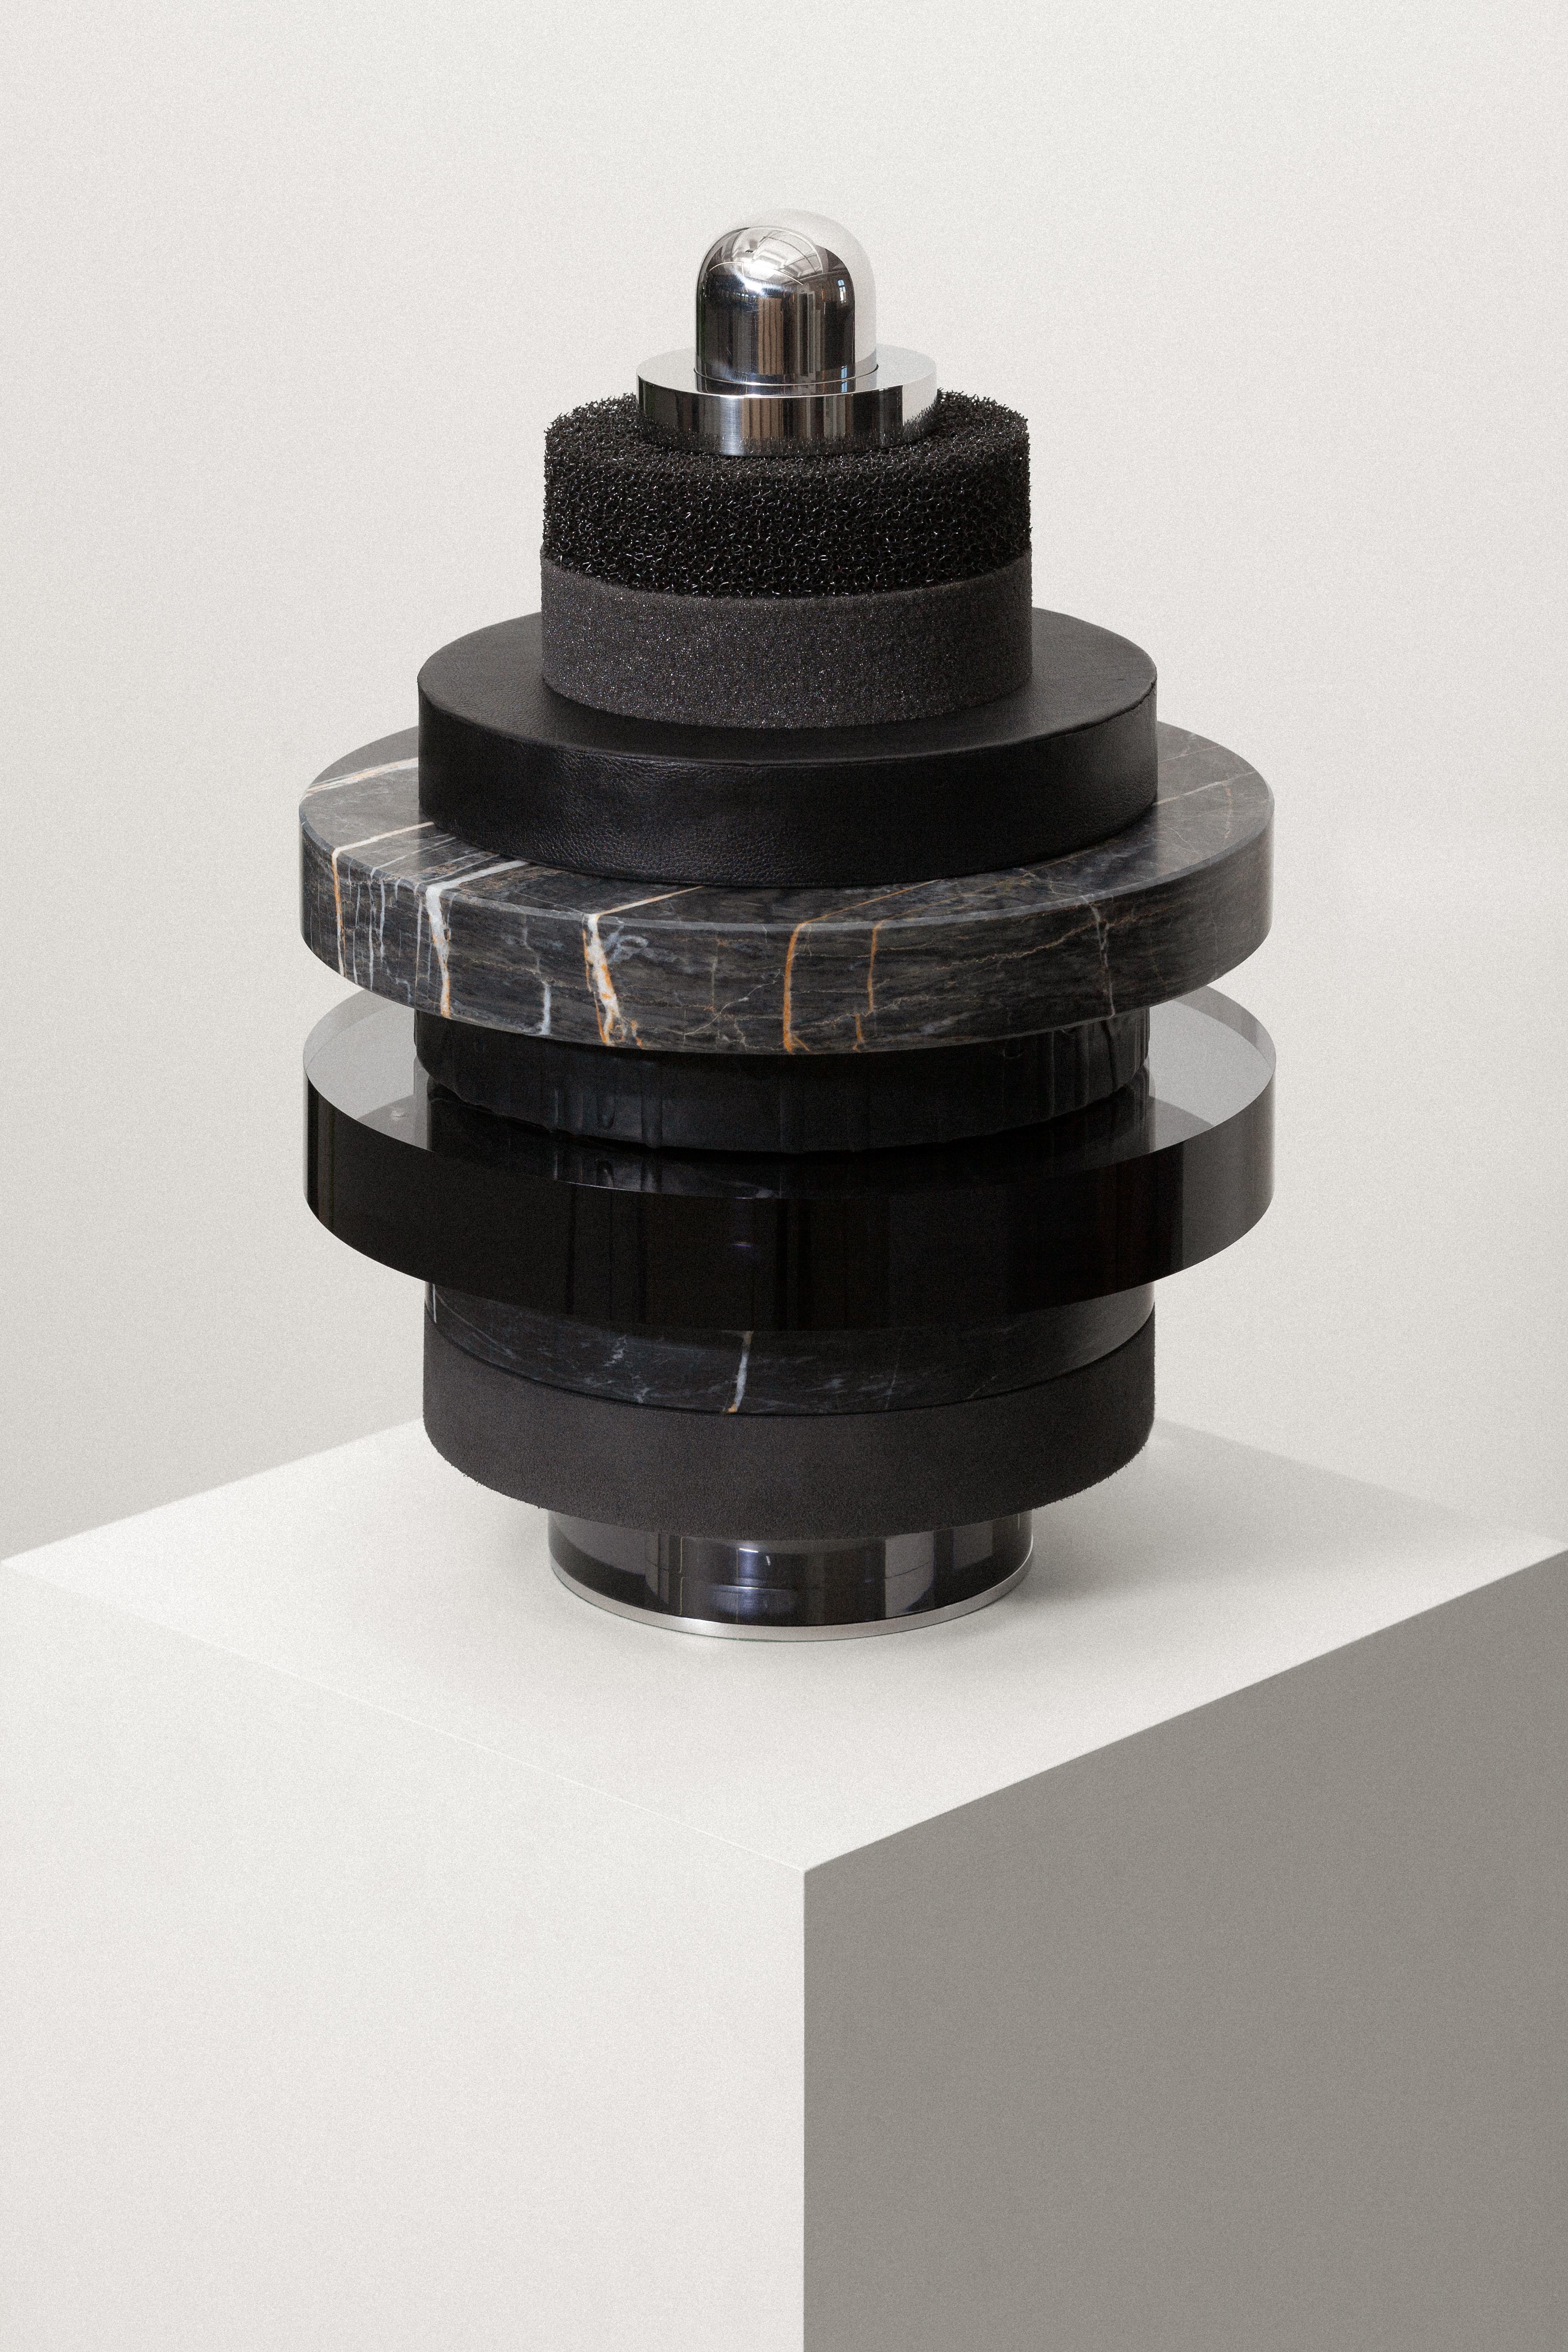 Post-Modern Toys Berlin Perception Untitled II Table Sculpture by Vaust